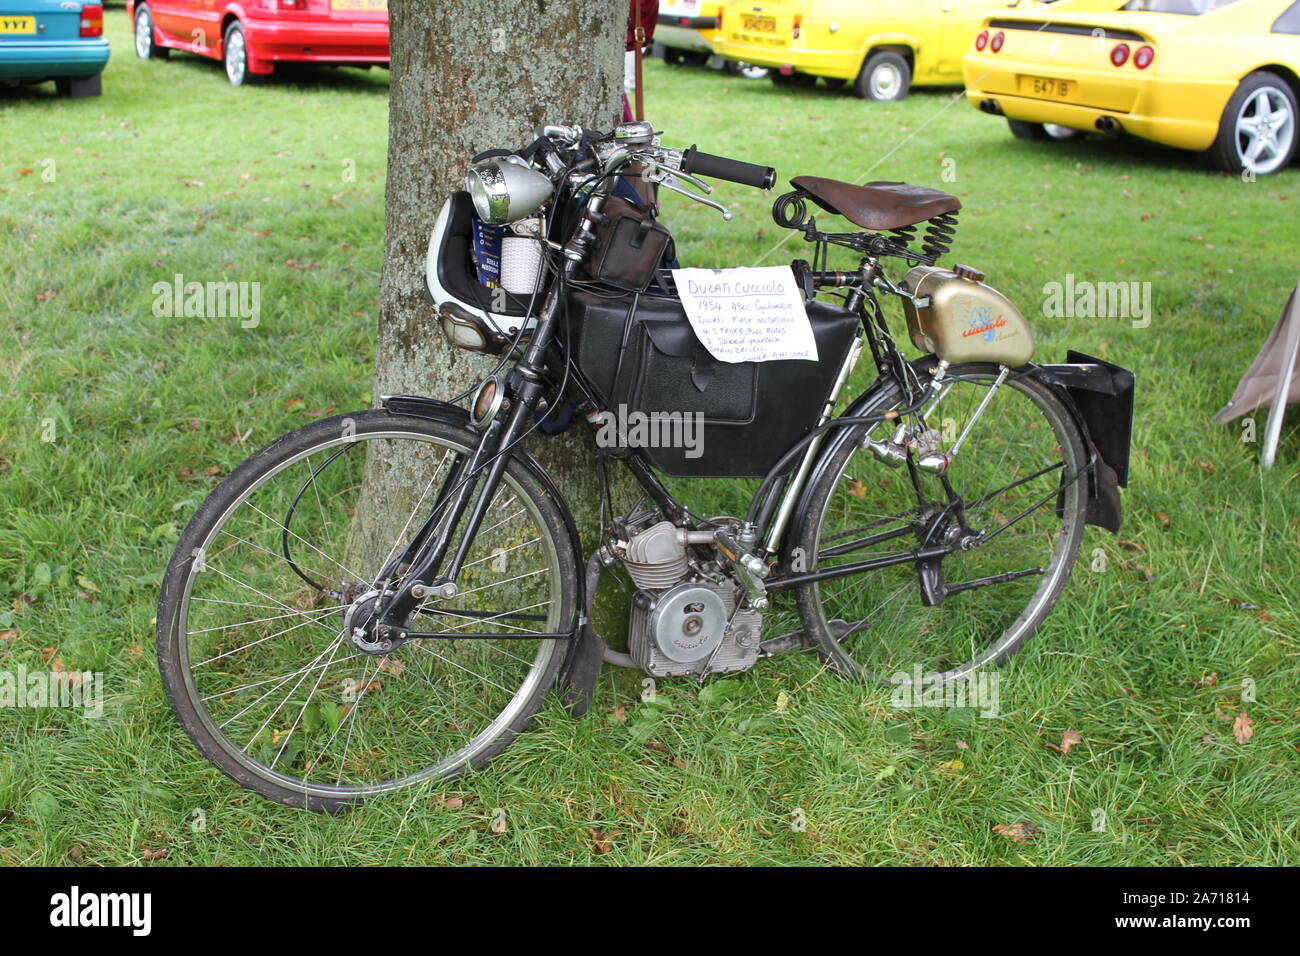 Ducati's first "Motorcycle": A 1954 Ducati Cucciolo chain driven seen at  Kilbroney Vintage Show 2019 Stock Photo - Alamy